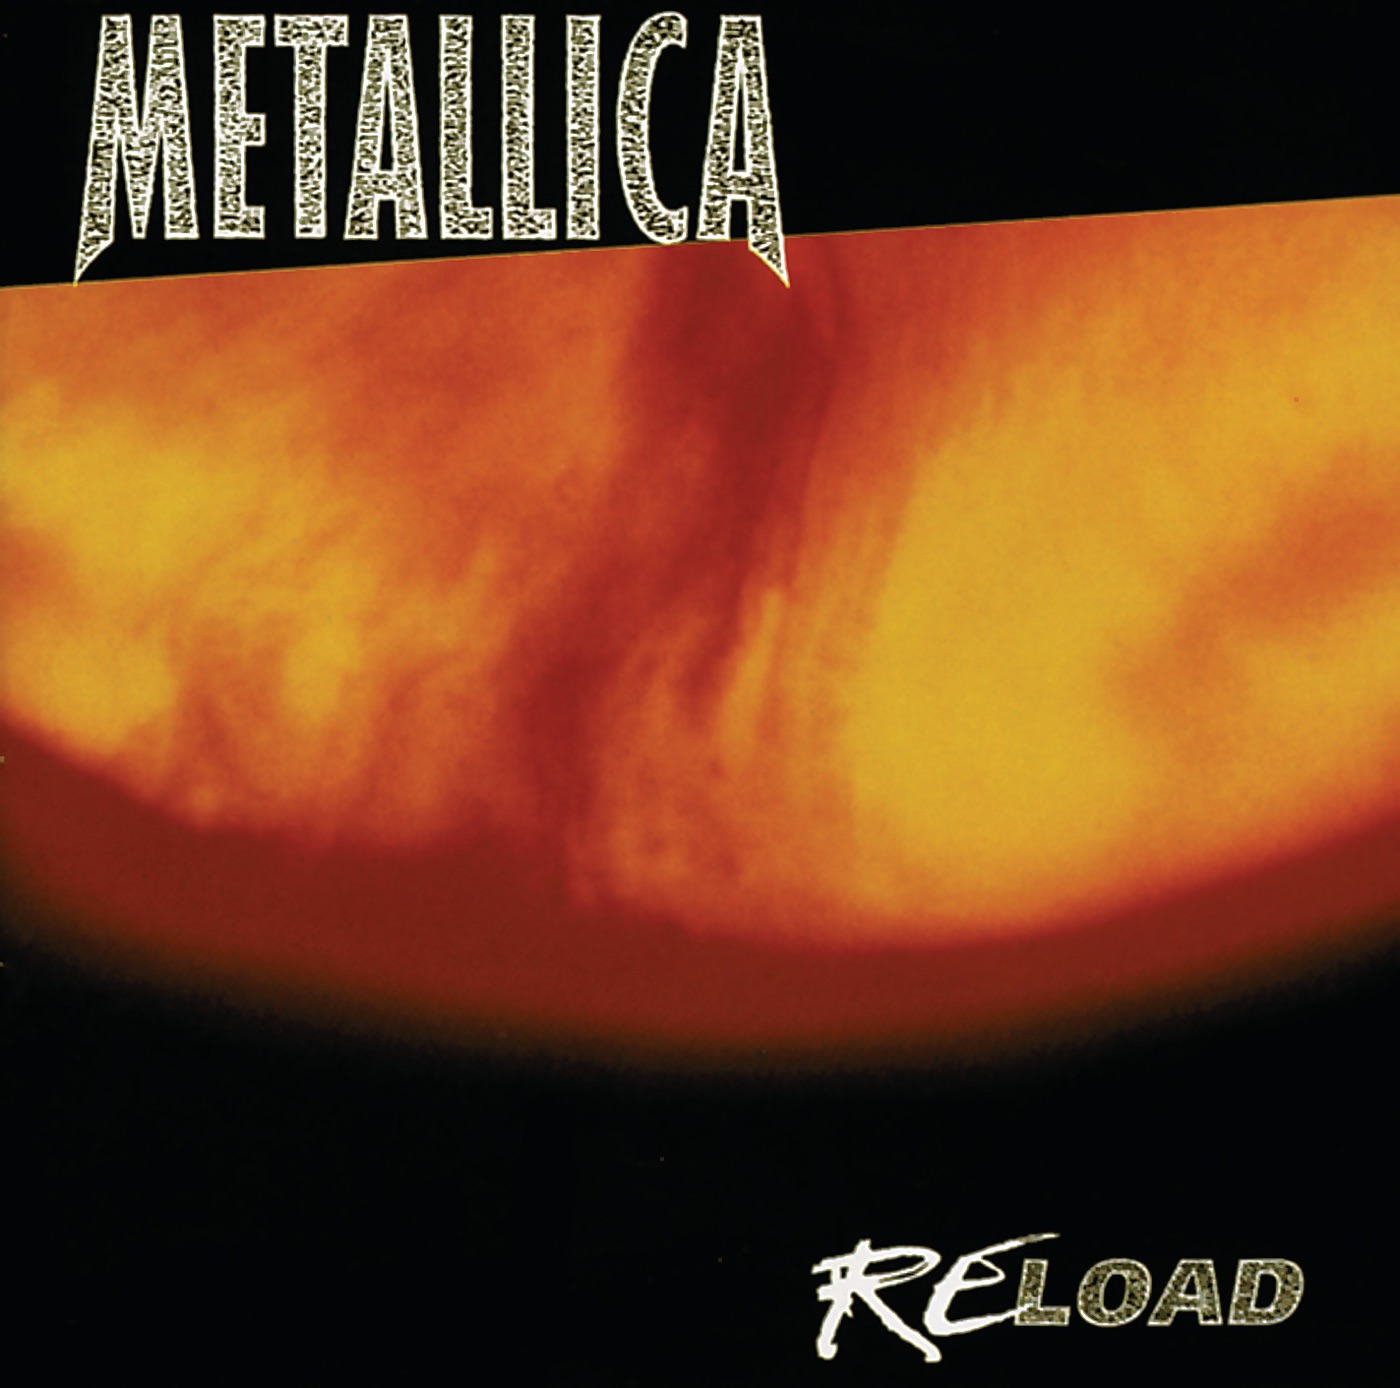 Reload by Metallica